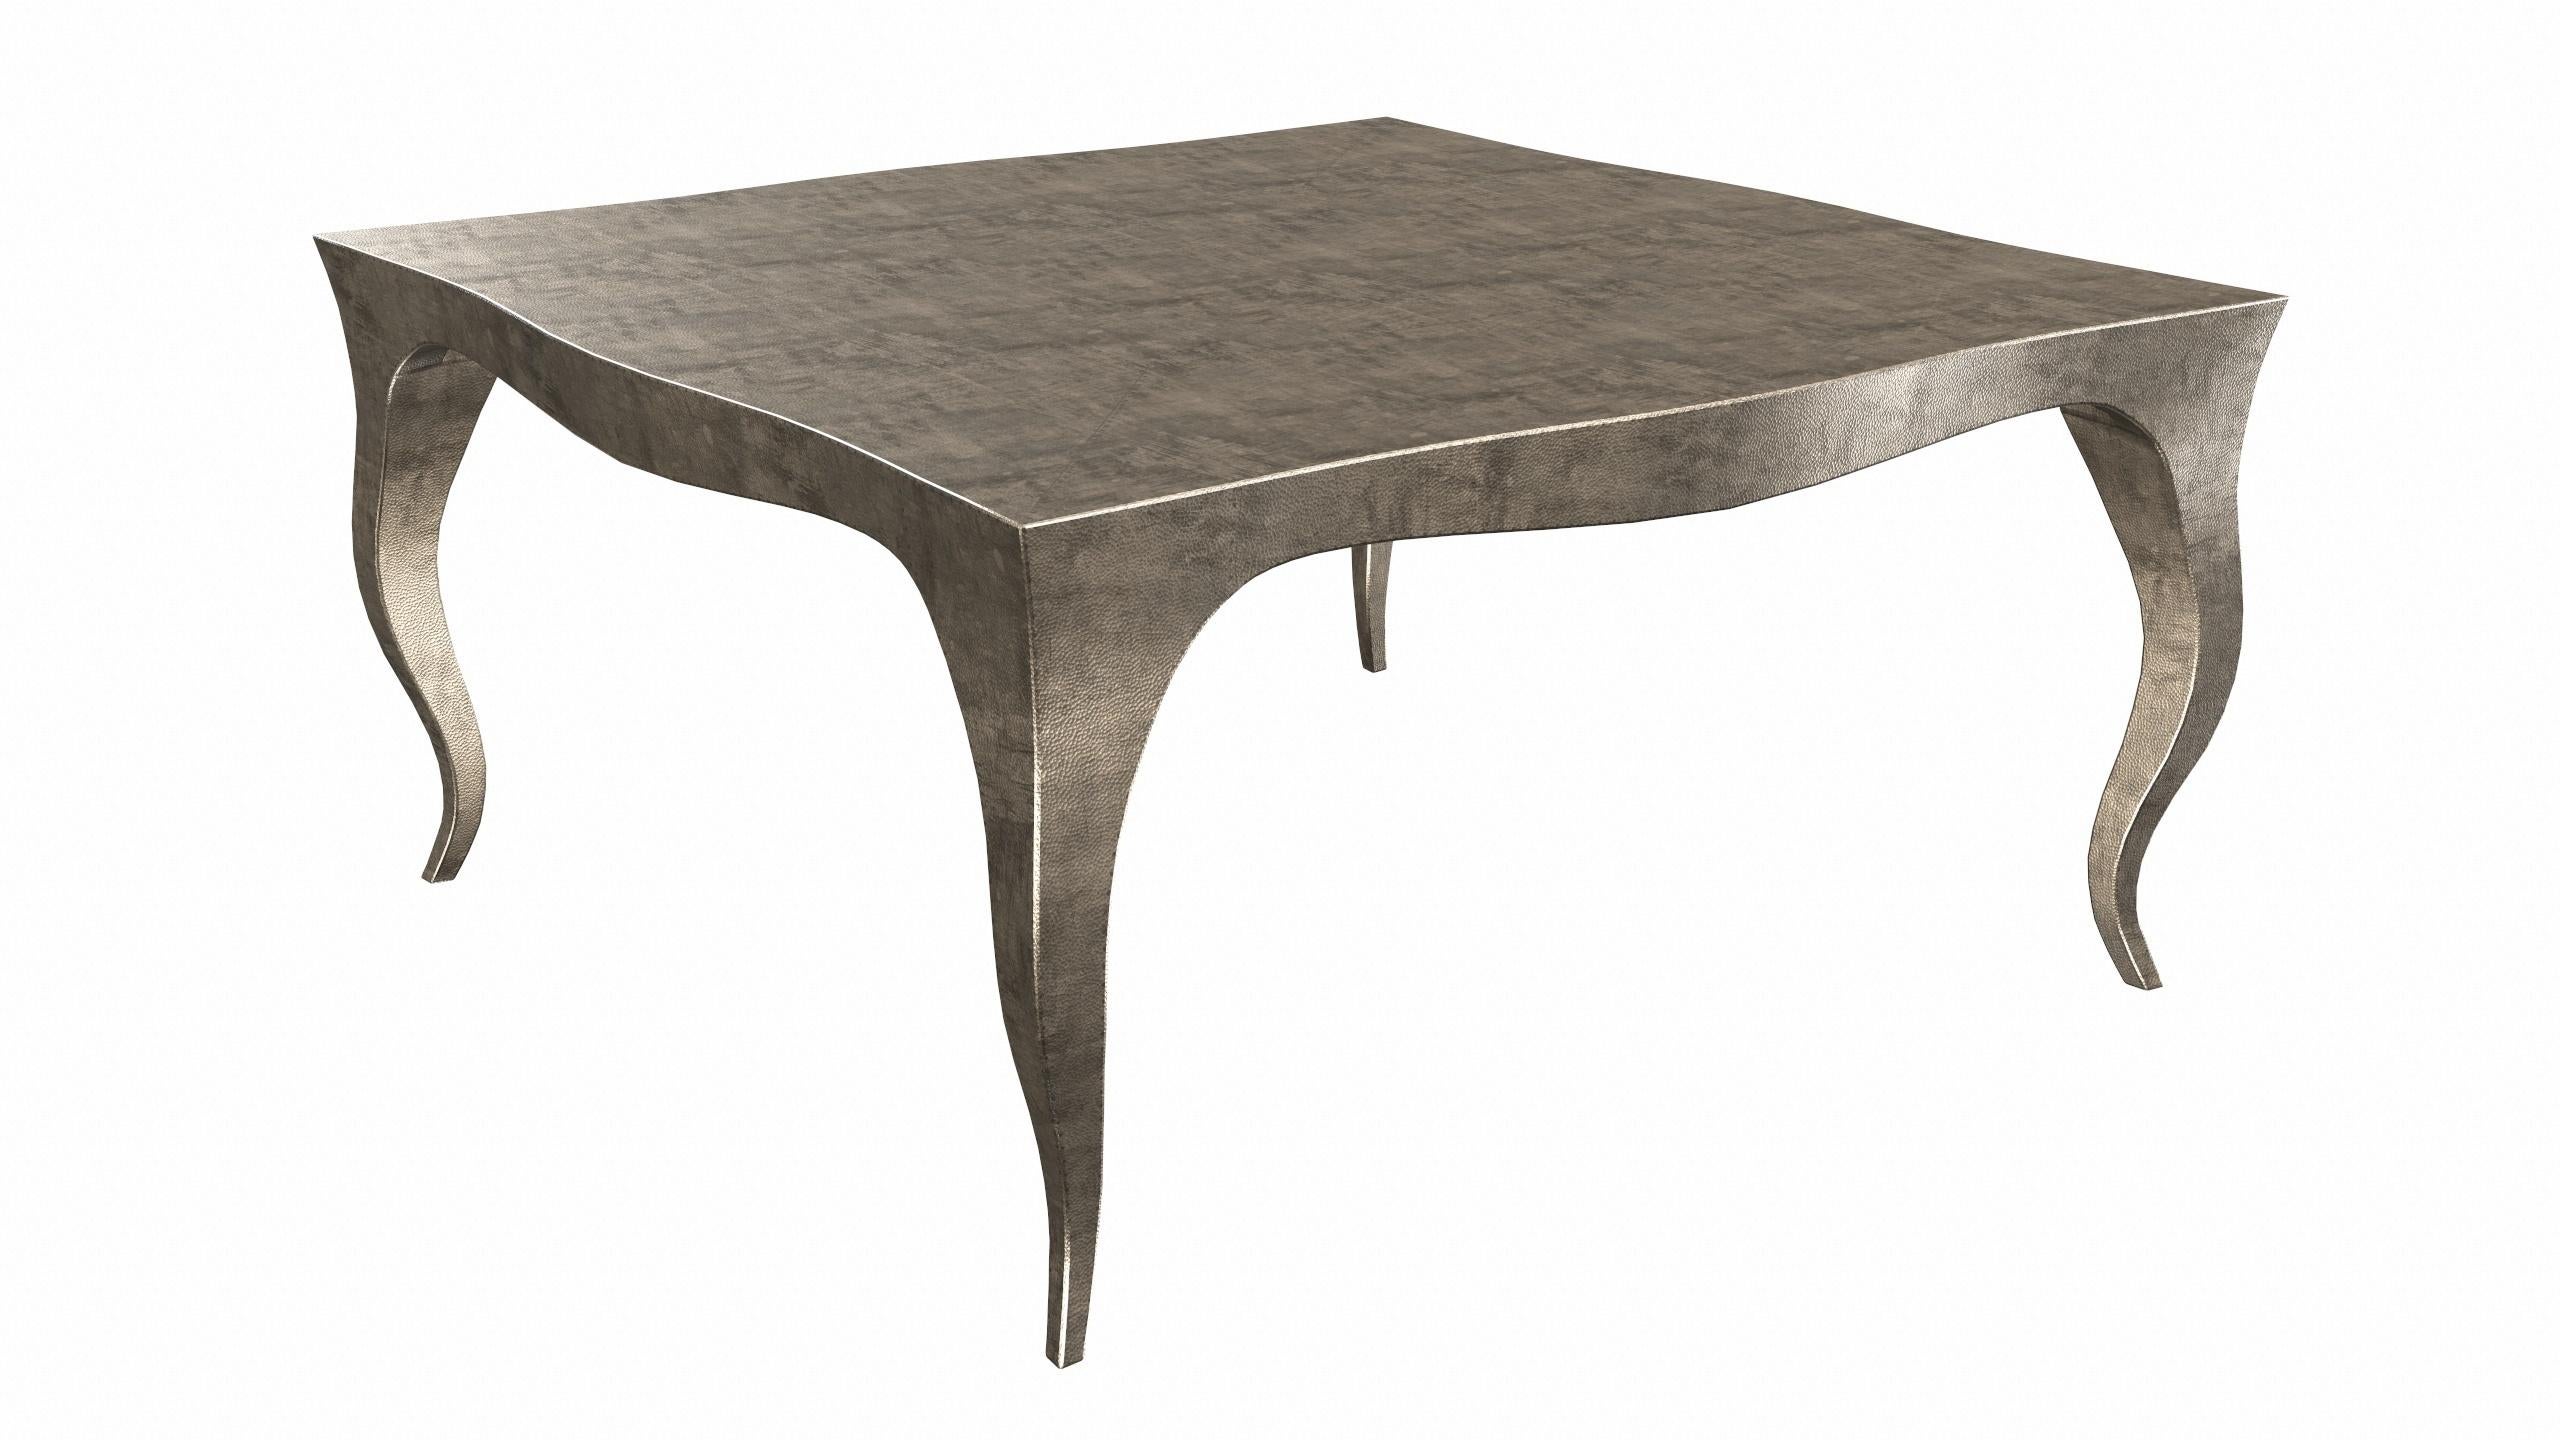 Contemporary Louise Art Deco Coffee Tables Mid. Hammered Antique Bronze 18.5x18.5x10 Inch For Sale